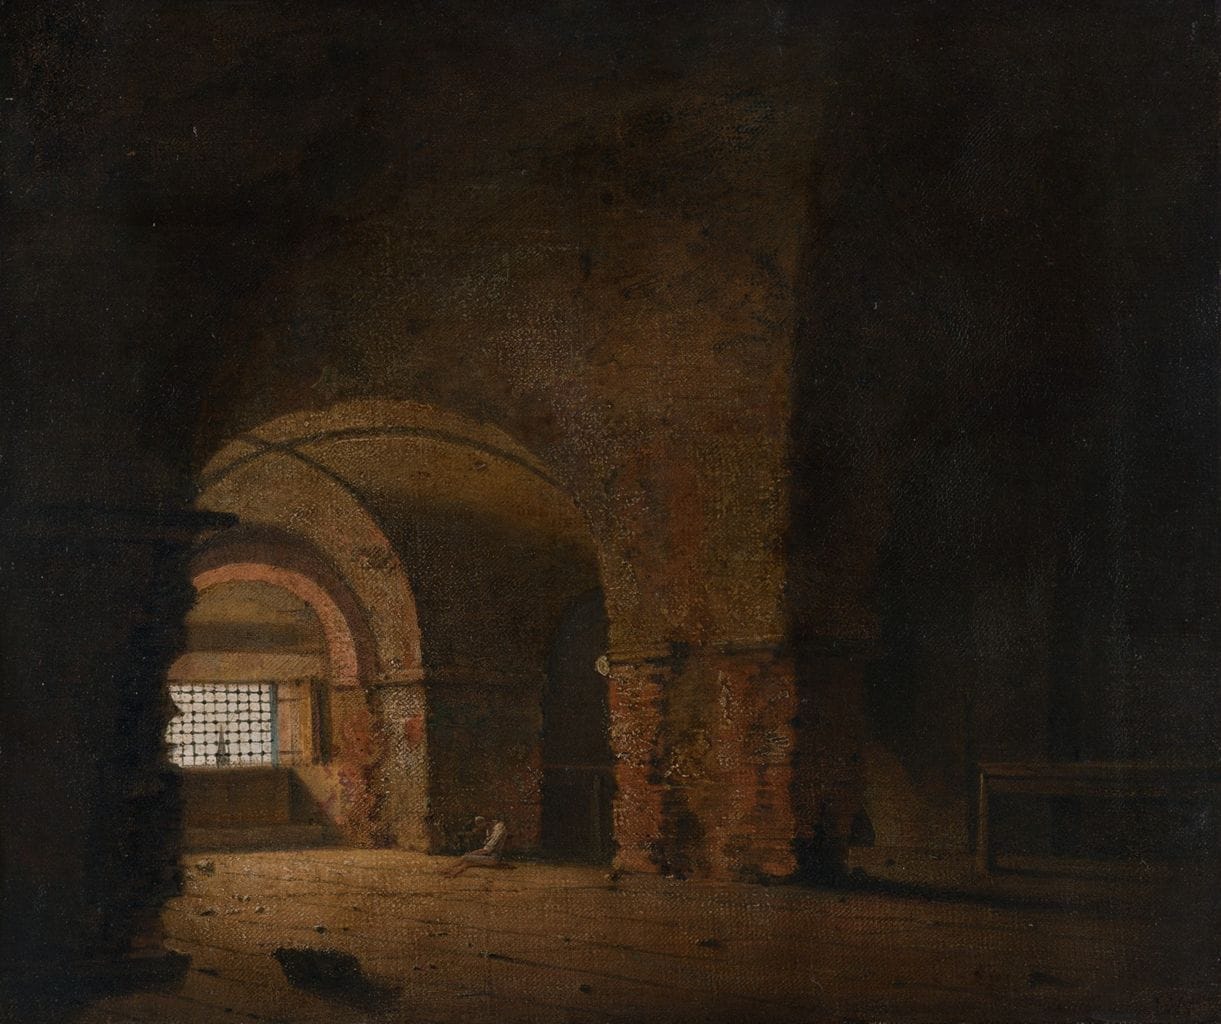 A lone figure, head bowed, seated on the floor of a dark prison cell with light filtering in through barred windows